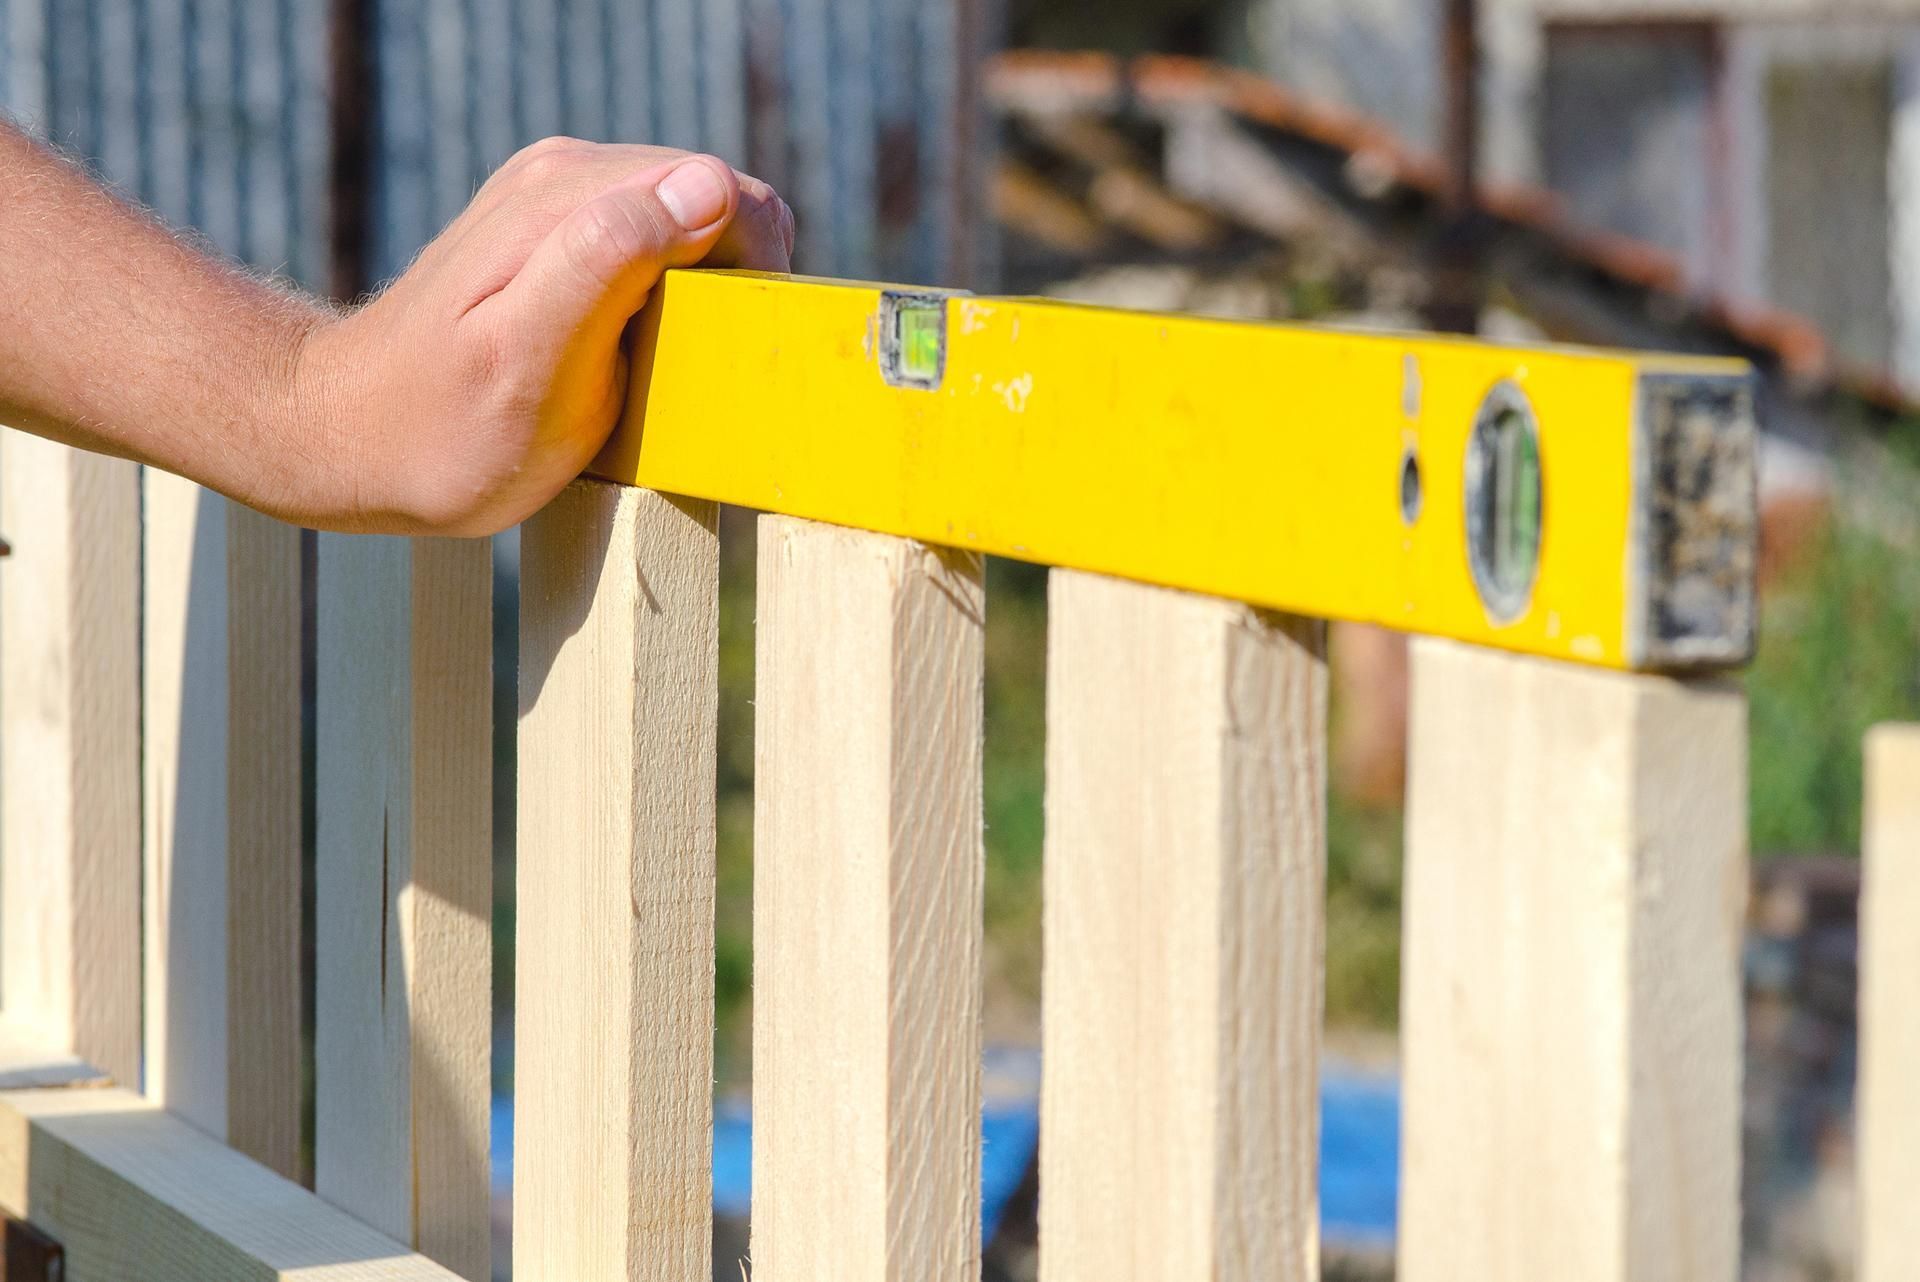 a person is measuring a wooden fence with a yellow level.